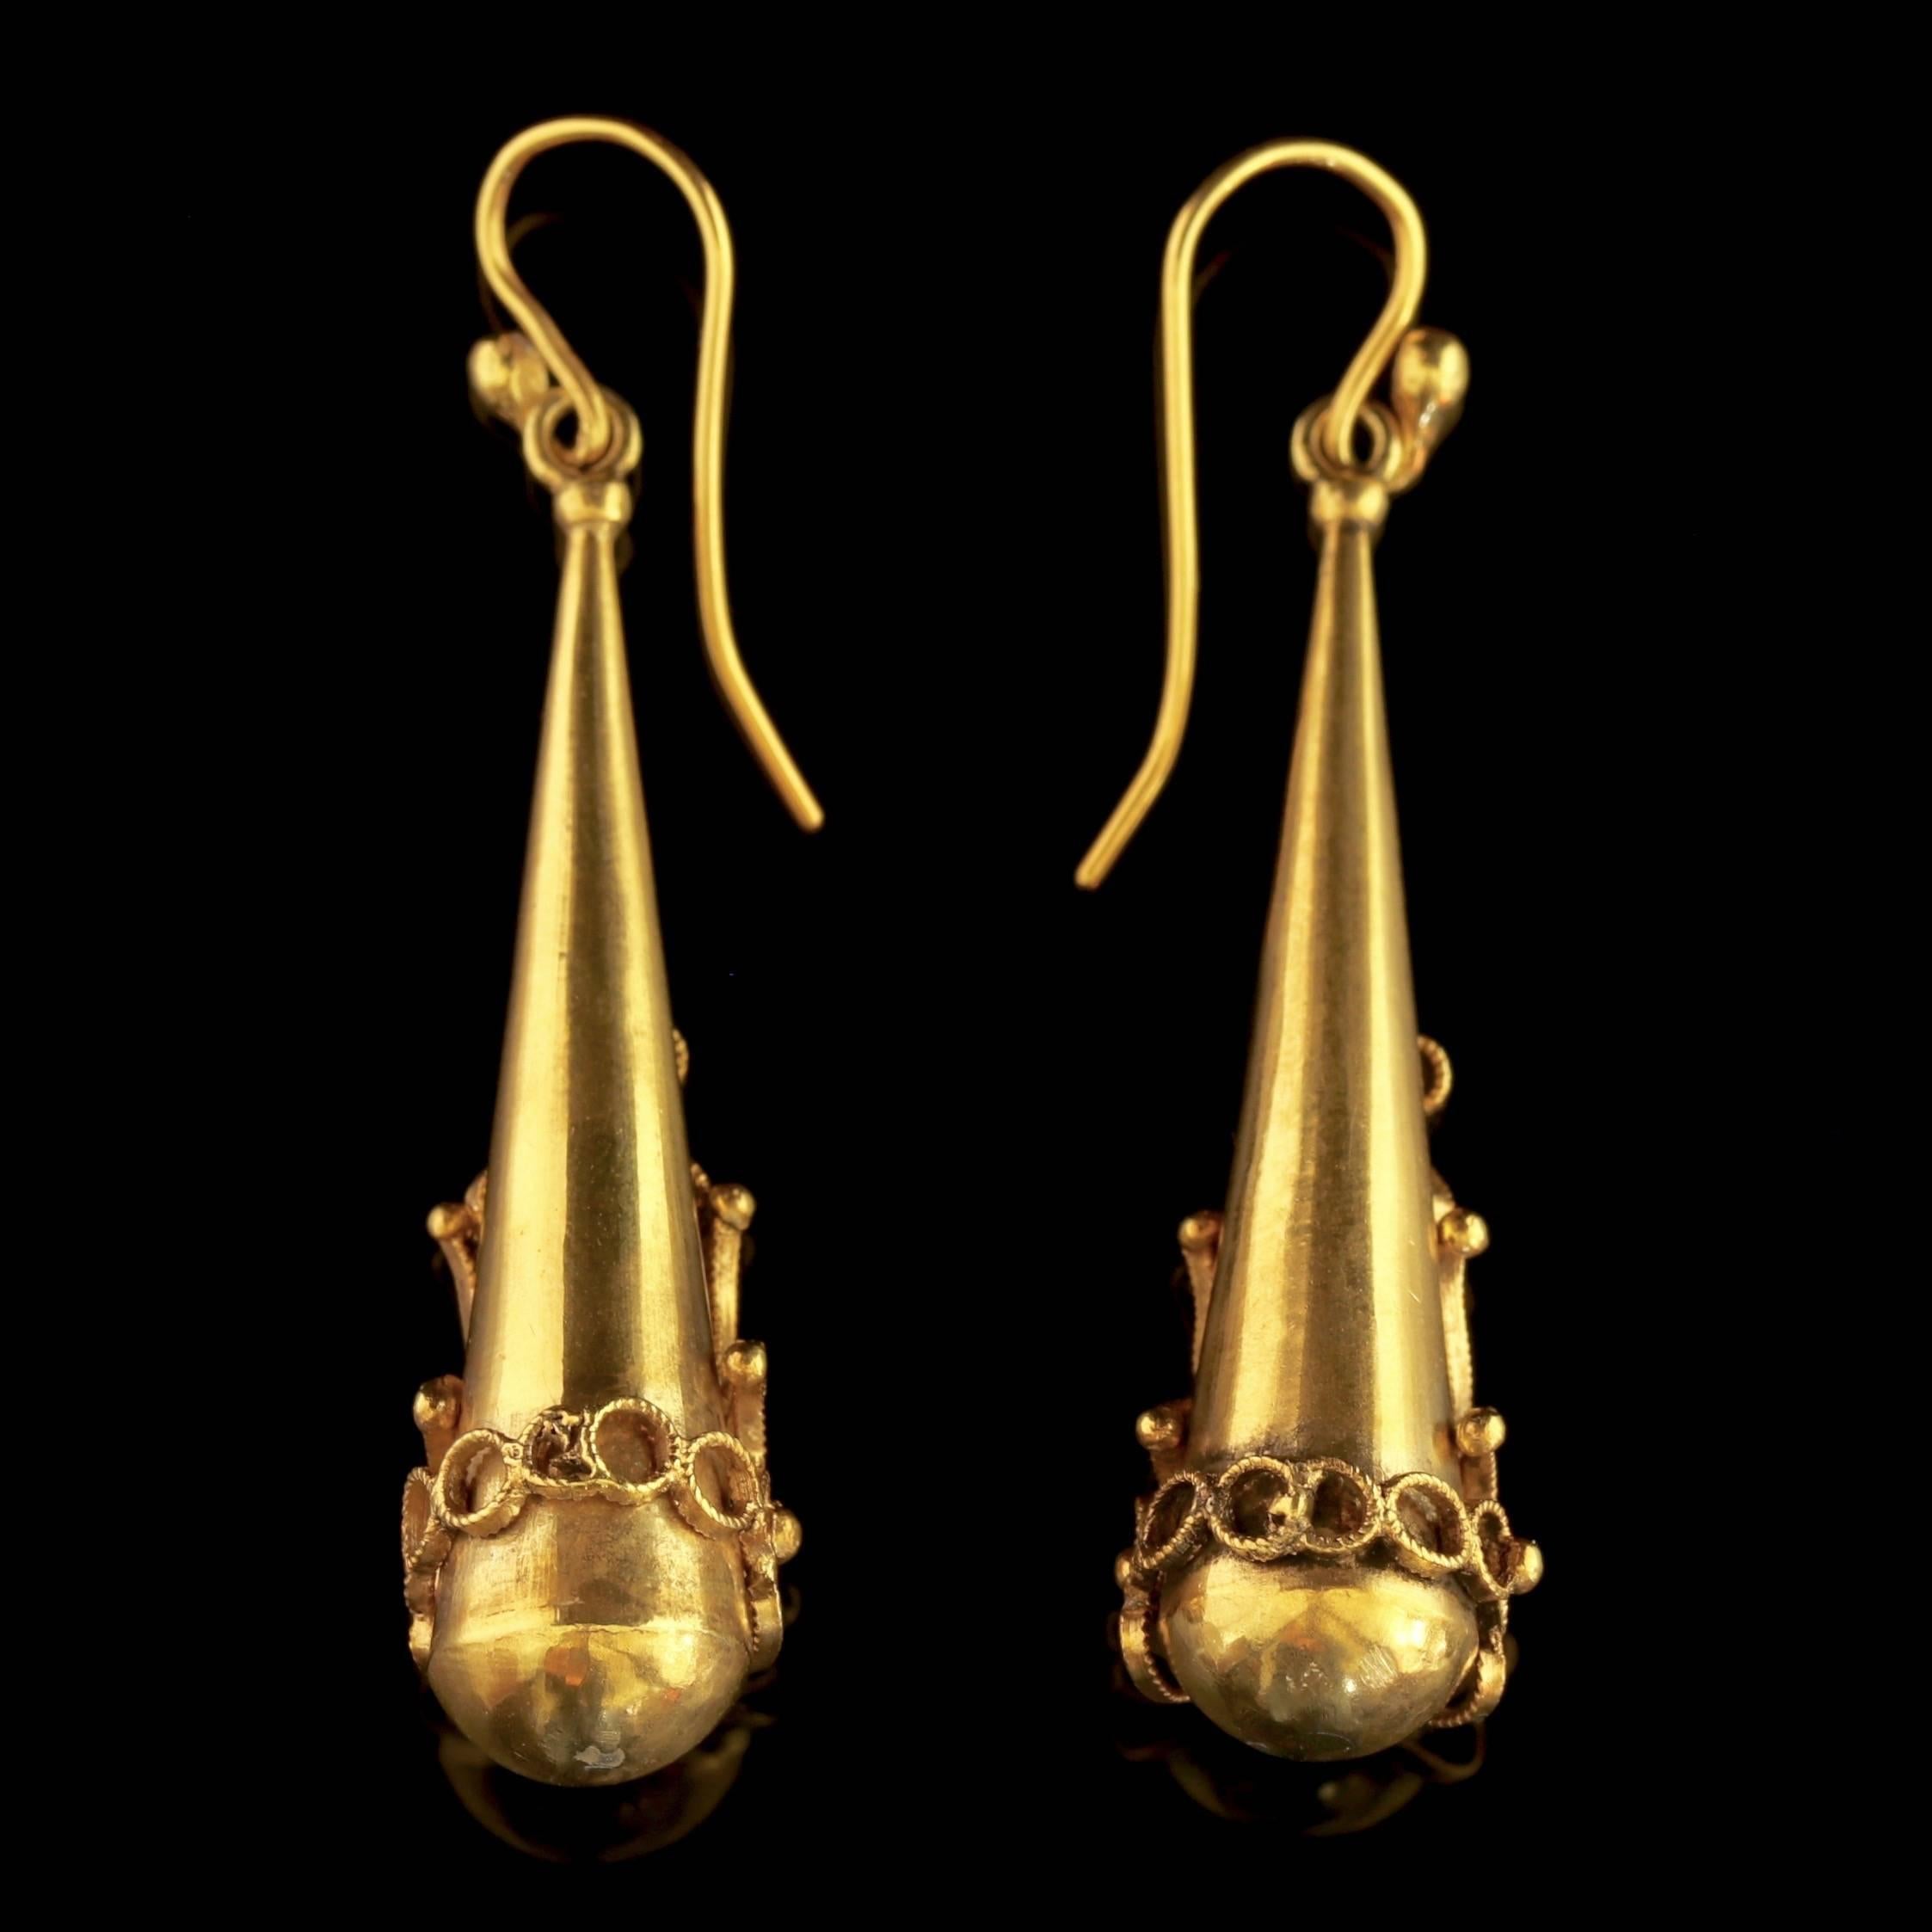 To read more please click continue reading below-

These fabulous long antique Georgian earrings are 18ct Gold on silver, Circa 1700. 

Due to its age, Georgian jewellery is quite rare, with some pieces almost three hundred years old. From 1714